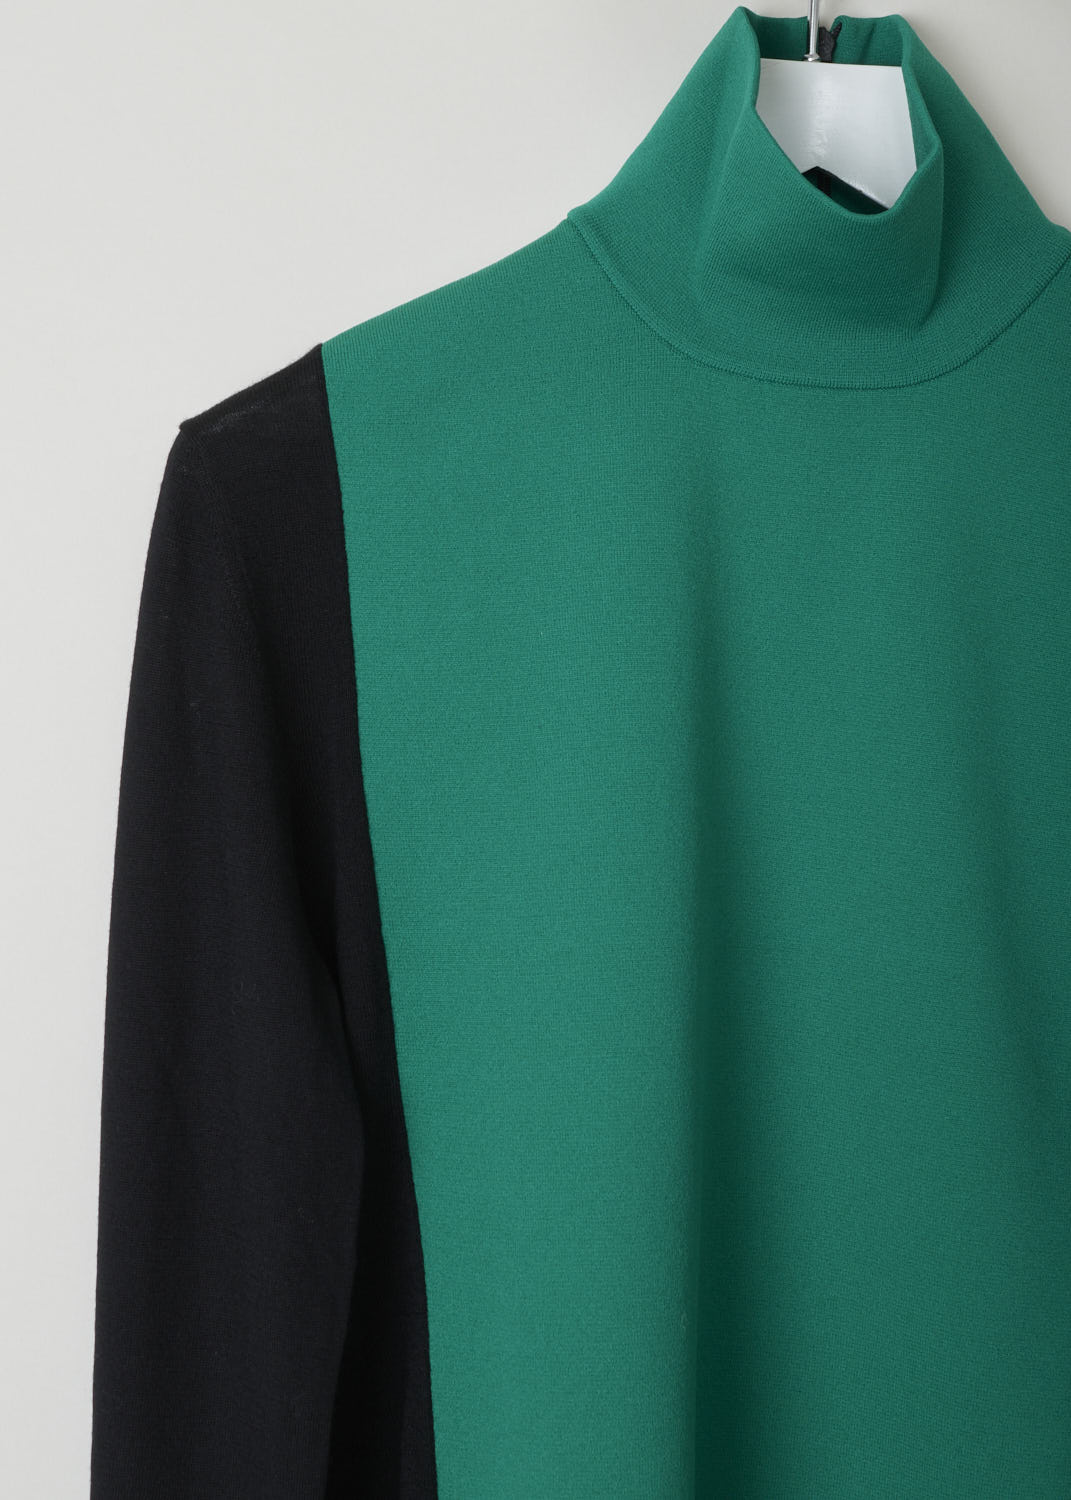 PLAN C, TWO-TONE TURTLENECK SWEATER, DVCMC51KG0_FW003_Z3052, Black, Green, Detail, Beautiful two-toned turtleneck. The long sleeves and back are a deep black and the front and neck are green. In the back of the neck, a concealed zipper can be found.
